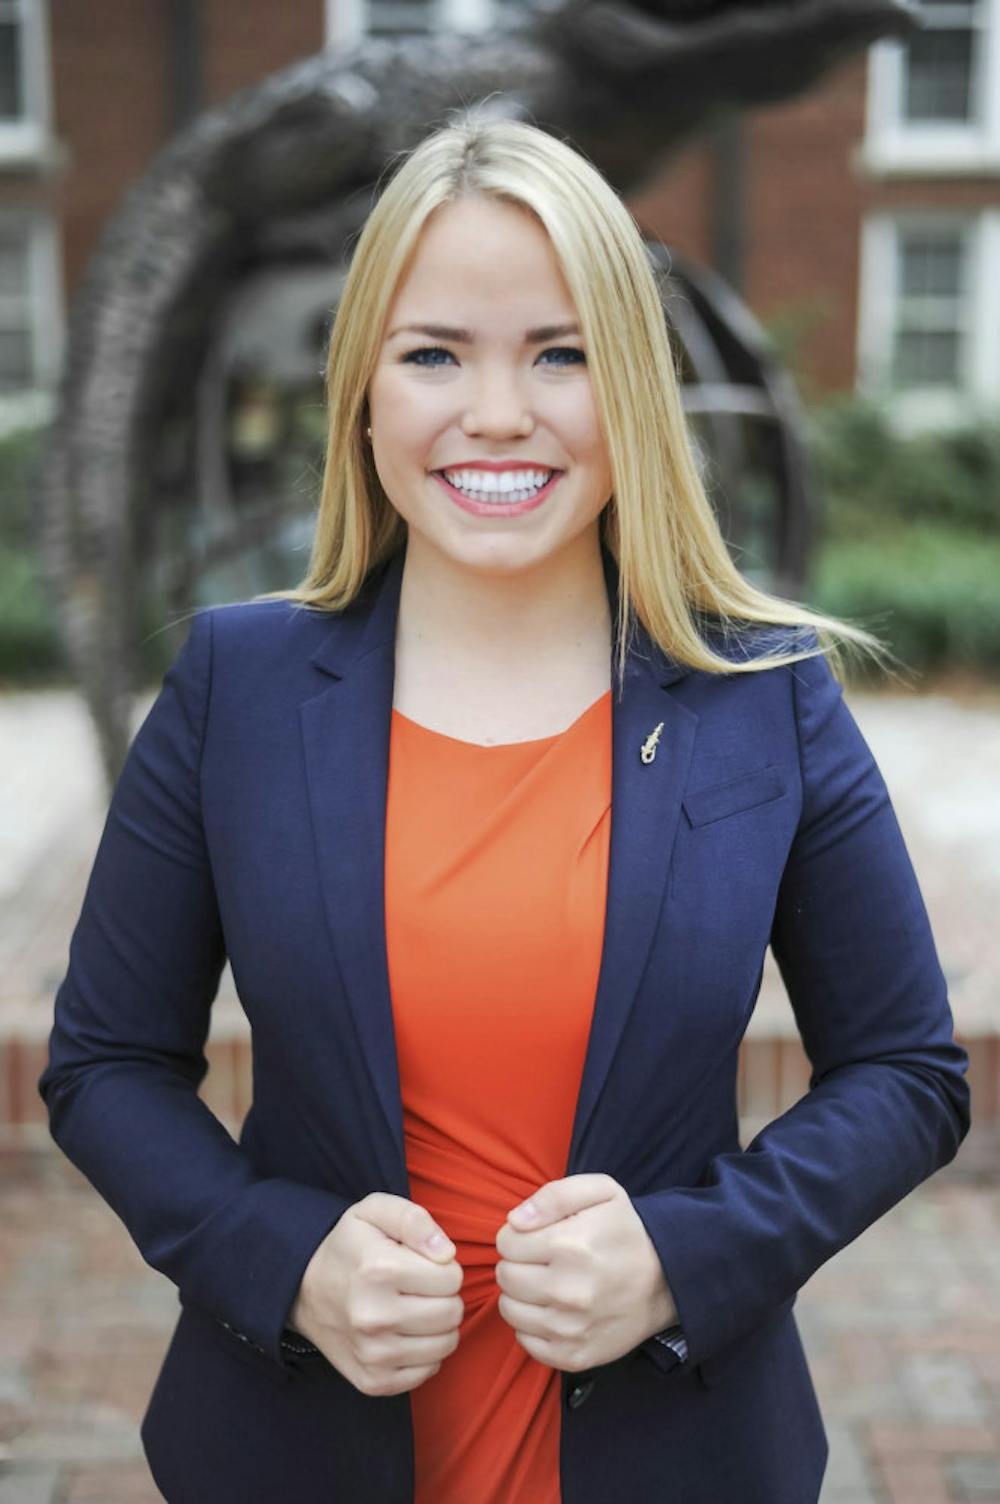 <p>Susan Webster is a 22-year-old UF international studies senior running for Student Body president with Impact Party.</p><p>Webster currently serves as UF Student Senate president and a District A senator. She served as chairwoman of the Budget and Appropriations Committee and Rules and Procedures Ad Hoc Committee. She started the Diversity Outreach and Mental Health Awareness Ad Hoc Committees. She also helped open the Field and Fork Food Pantry.</p><p>Webster said she hopes to make changes to help serve students and make UF a top-10 institution.</p><p>“I know that I will be able to fight for you not only on the university level, but in Tallahassee and in (Washington) D.C.,” she said.</p>